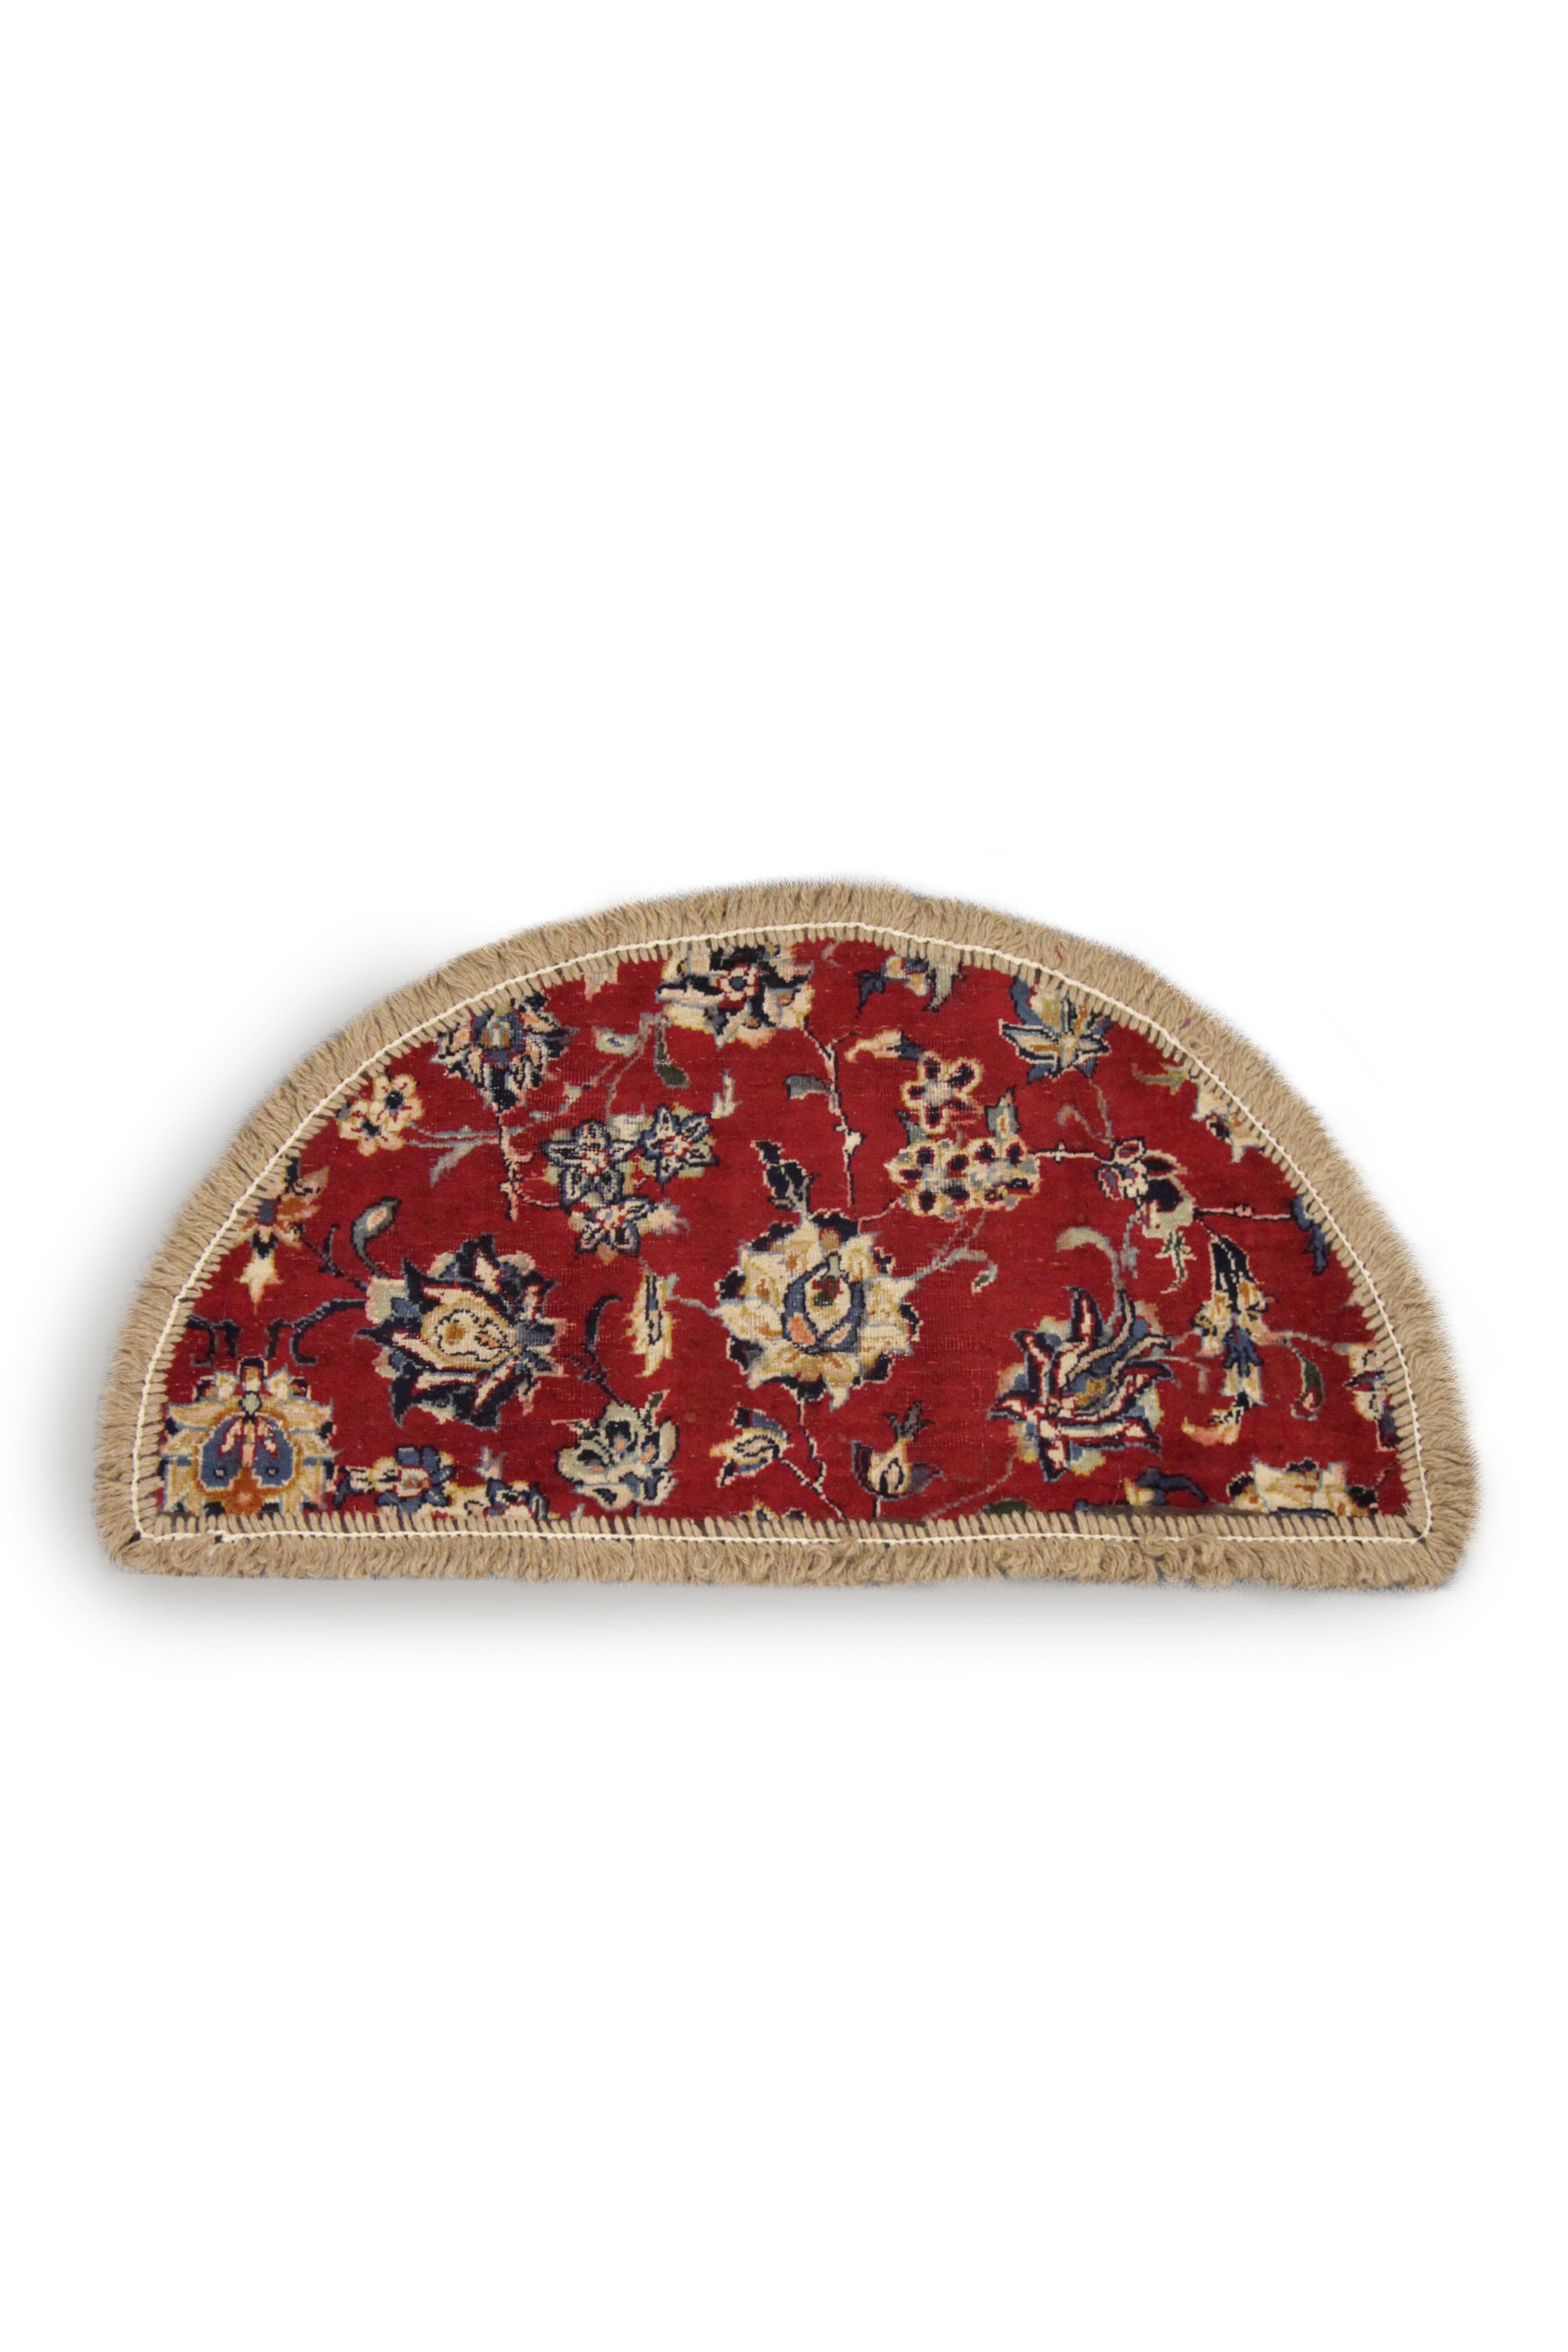 Handmade carpet delicate and detailed meandering floral motifs over this oriental rug floating on a background of deep red, perfect for use as a bedside rug or entranceway doormat. This semicircle entranceway doormat has been refurbished from a